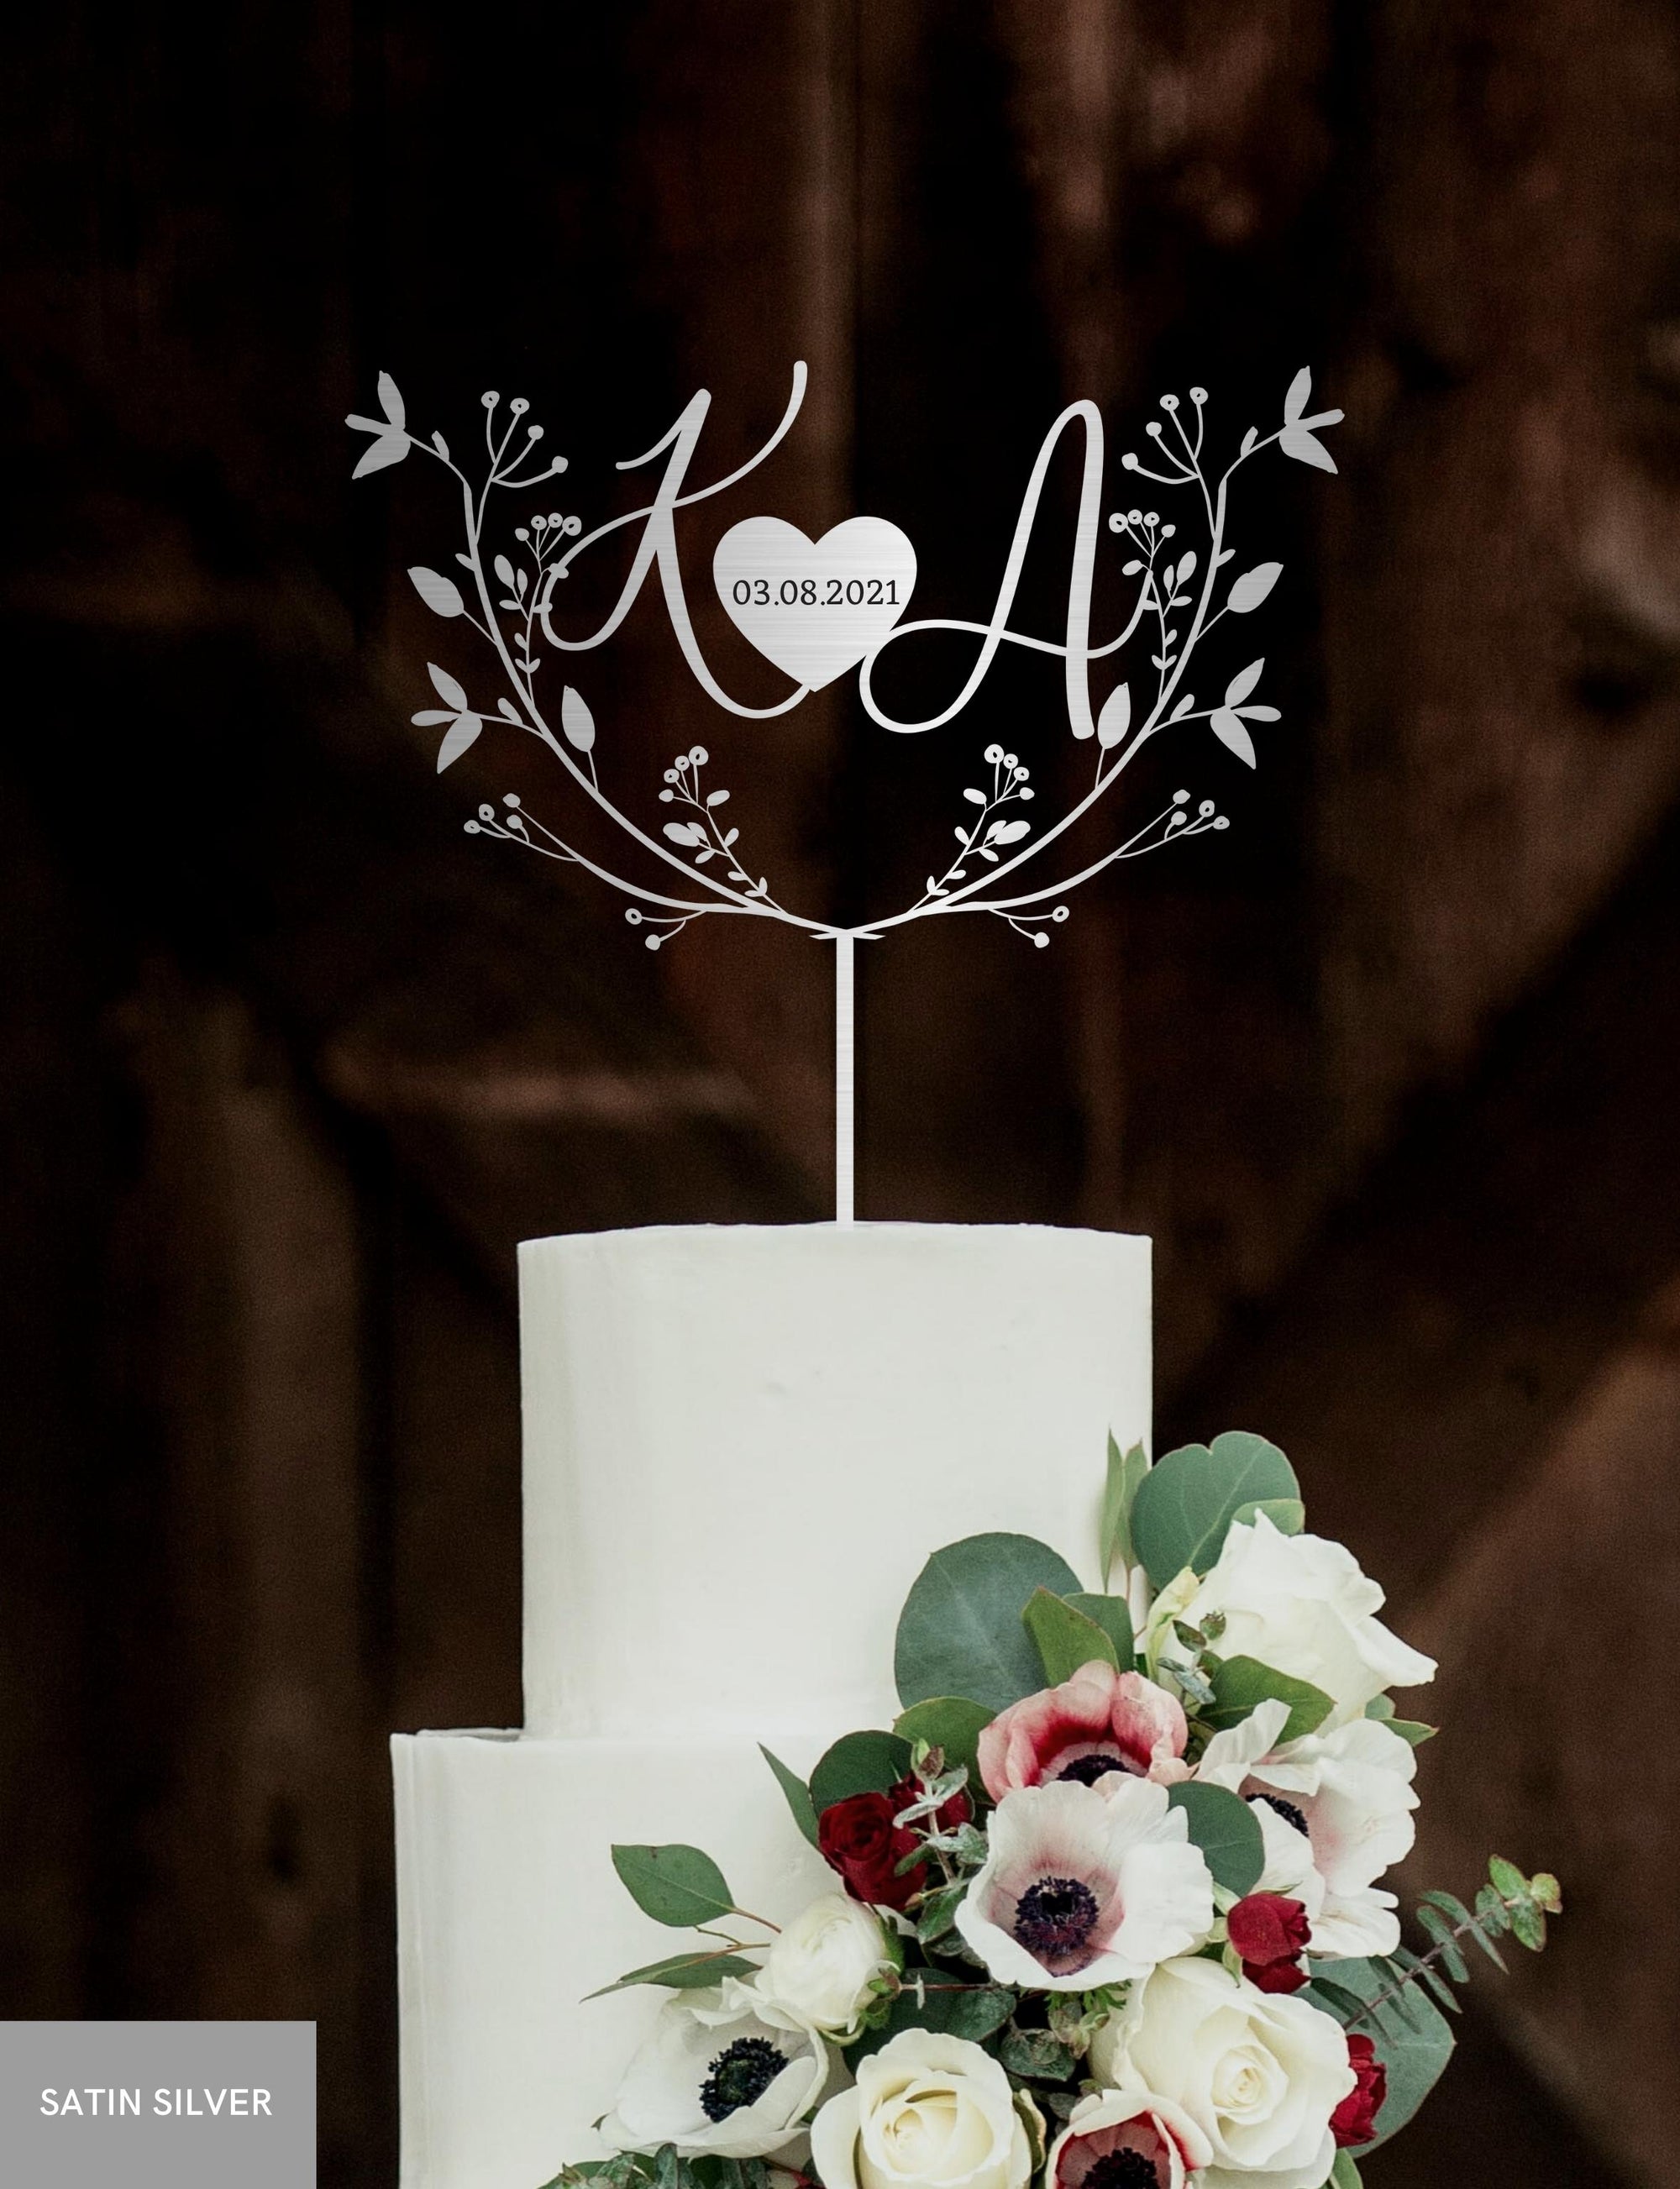 Personalised MDF/ Mirror Acrylic Wedding Cake Topper, Custom Join Name &amp; Engraved Date on Heart, Leaf Signage, Bridal &amp; Groom, Hens, Event Party Supply Decor